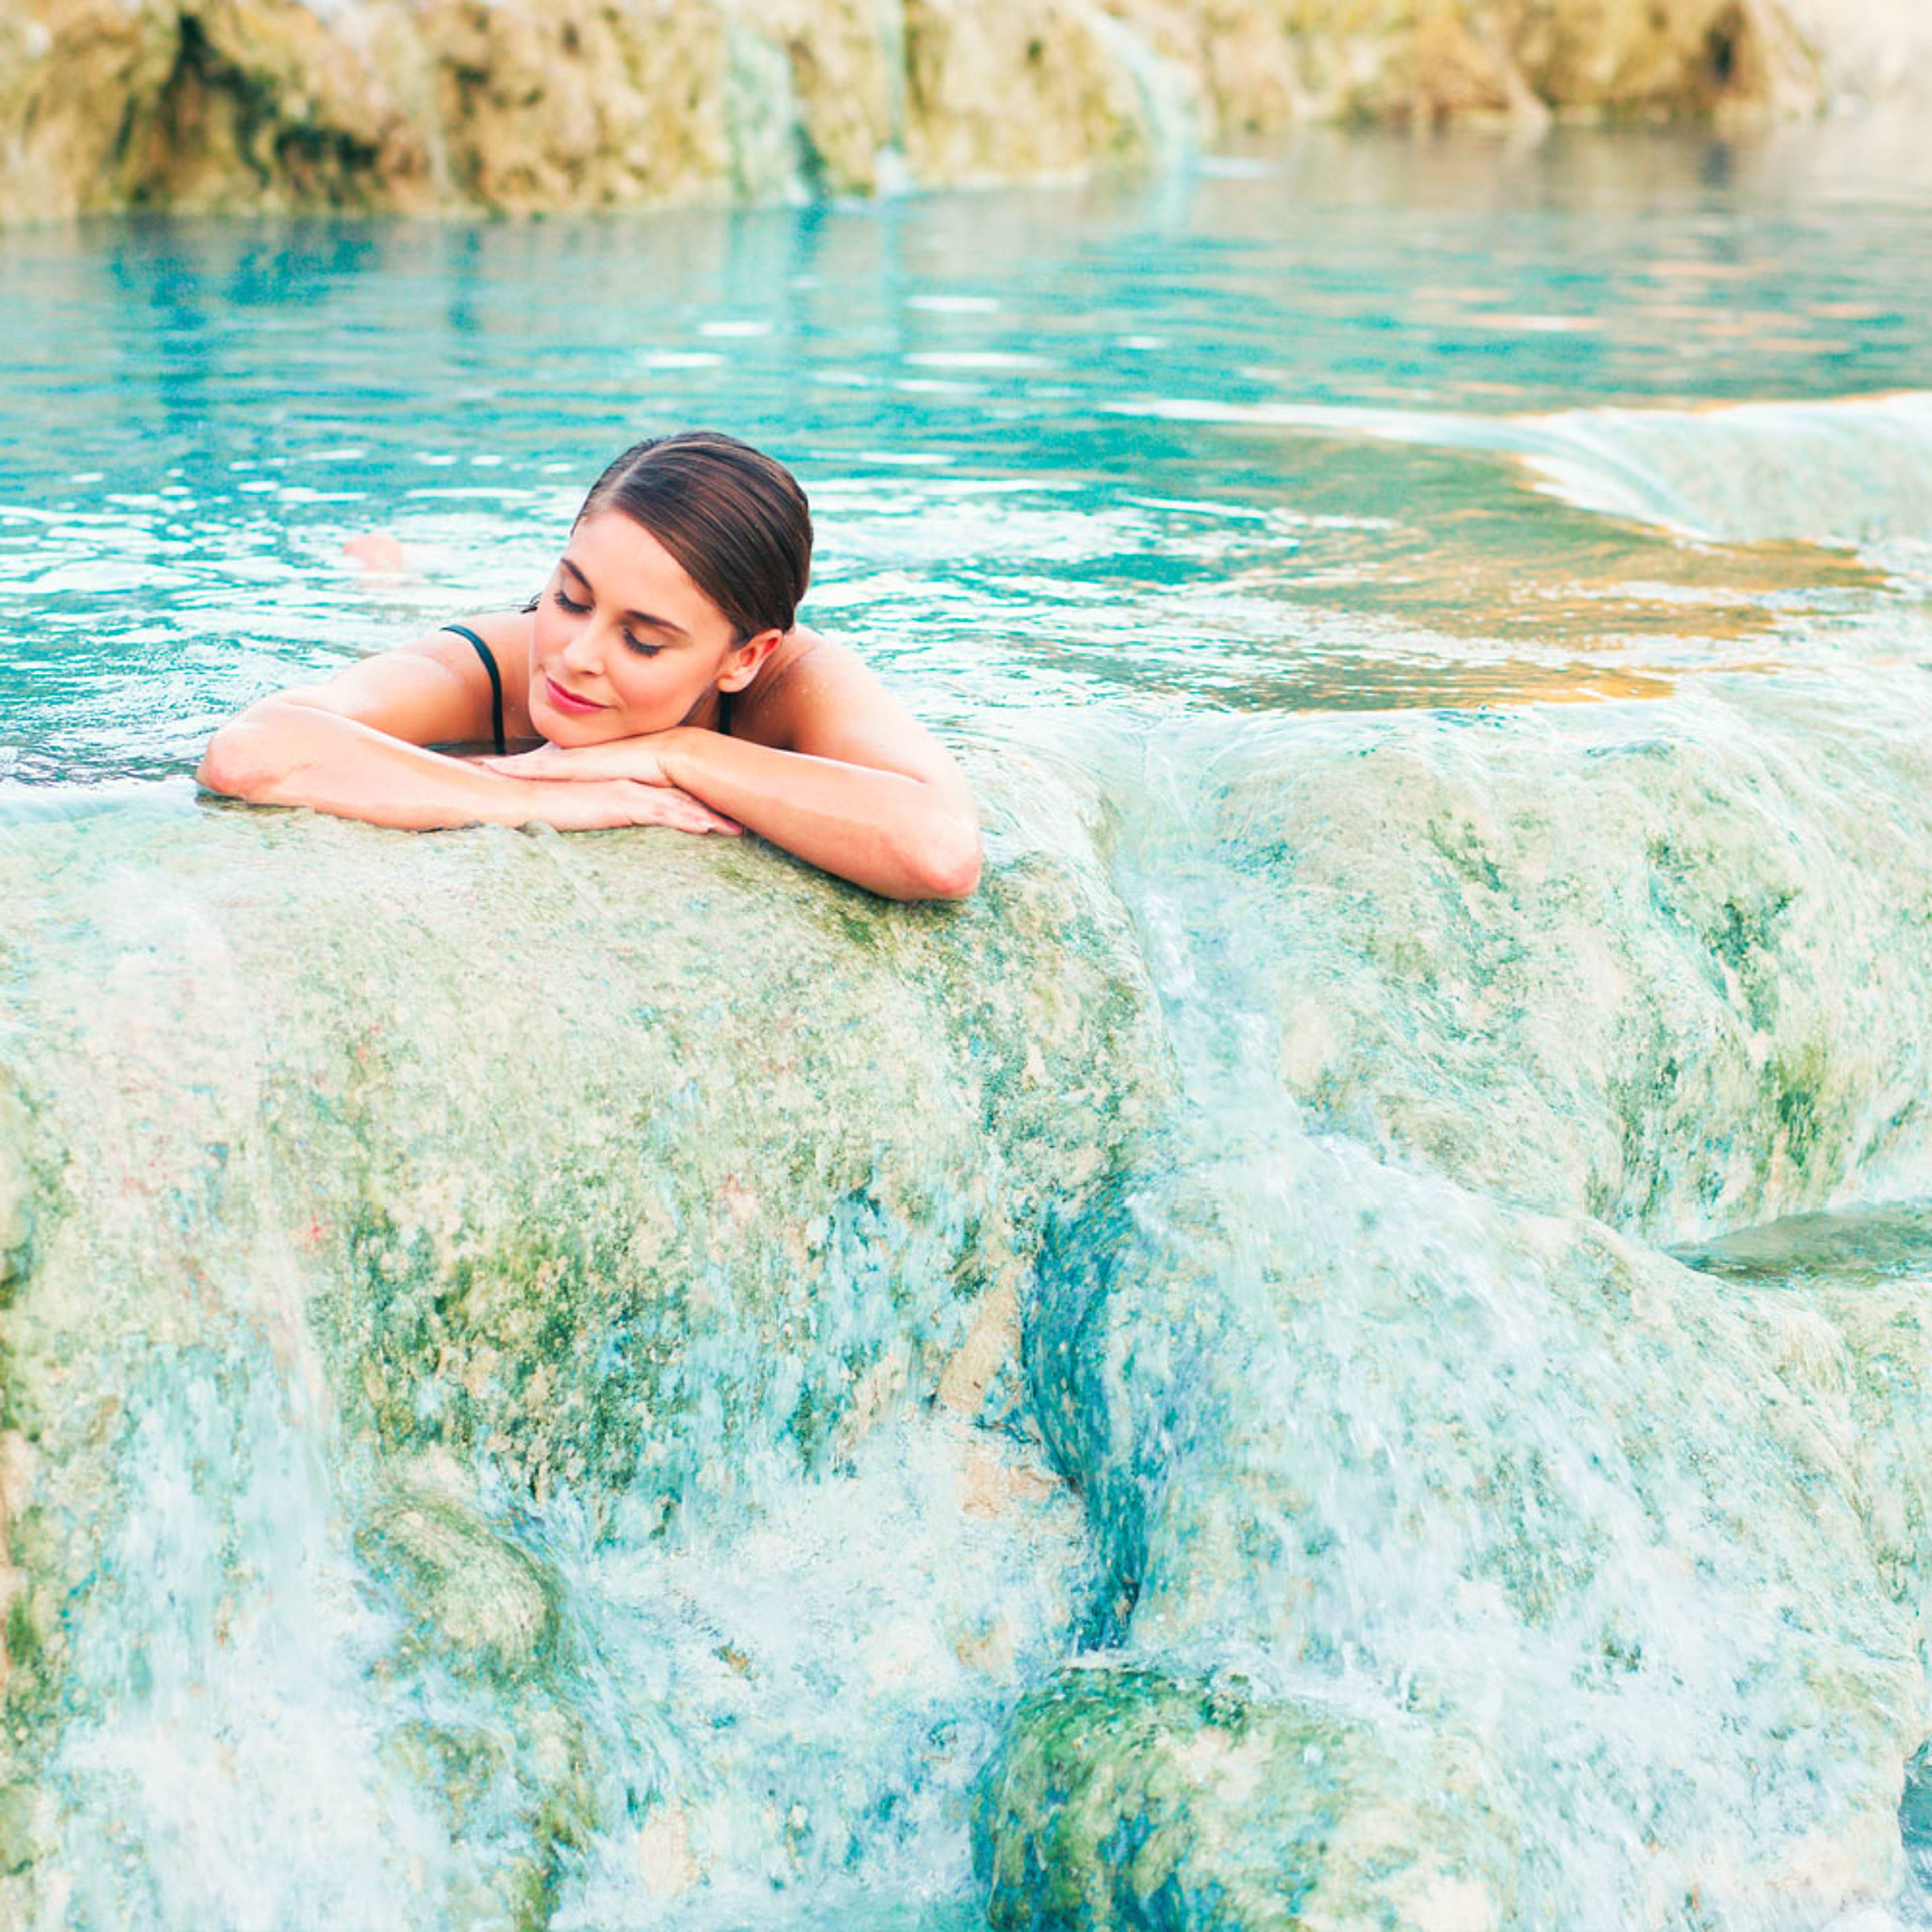 Experience wellness in Italy with a hand-picked local expert